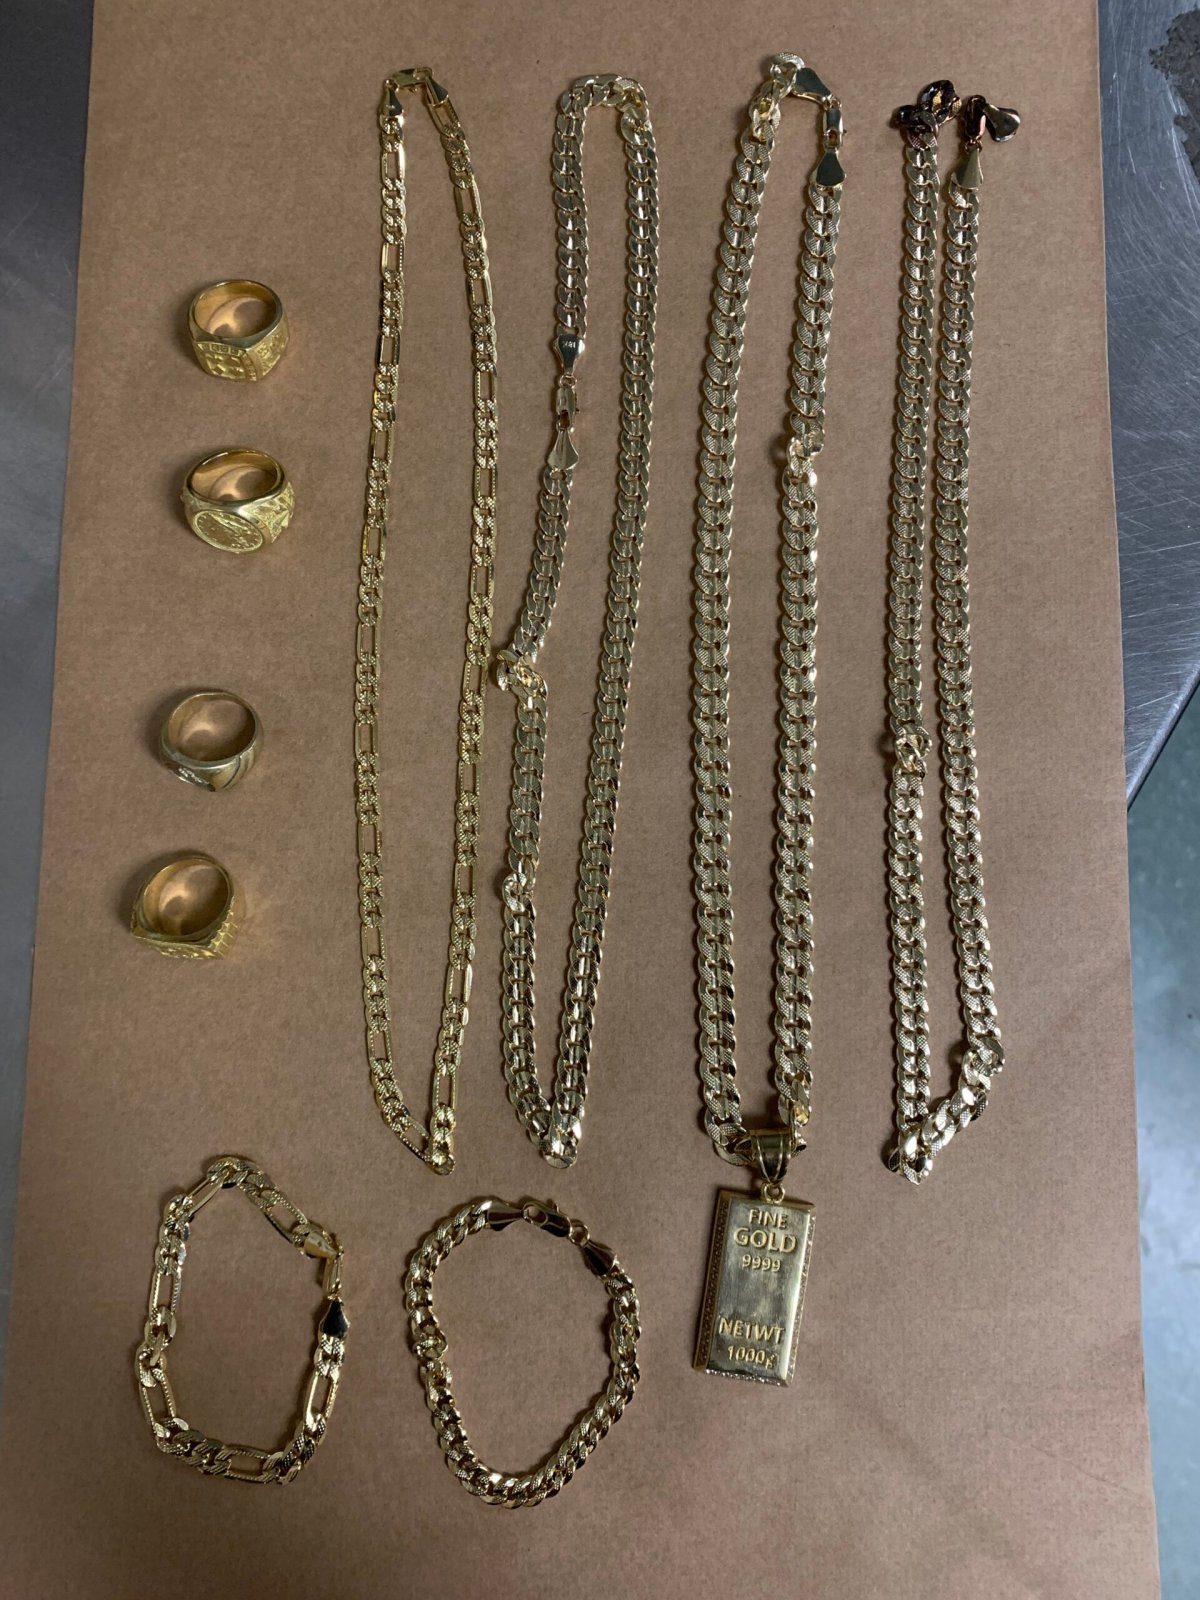 Fake gold used in a scam that cost a New Westminster man $1,800.